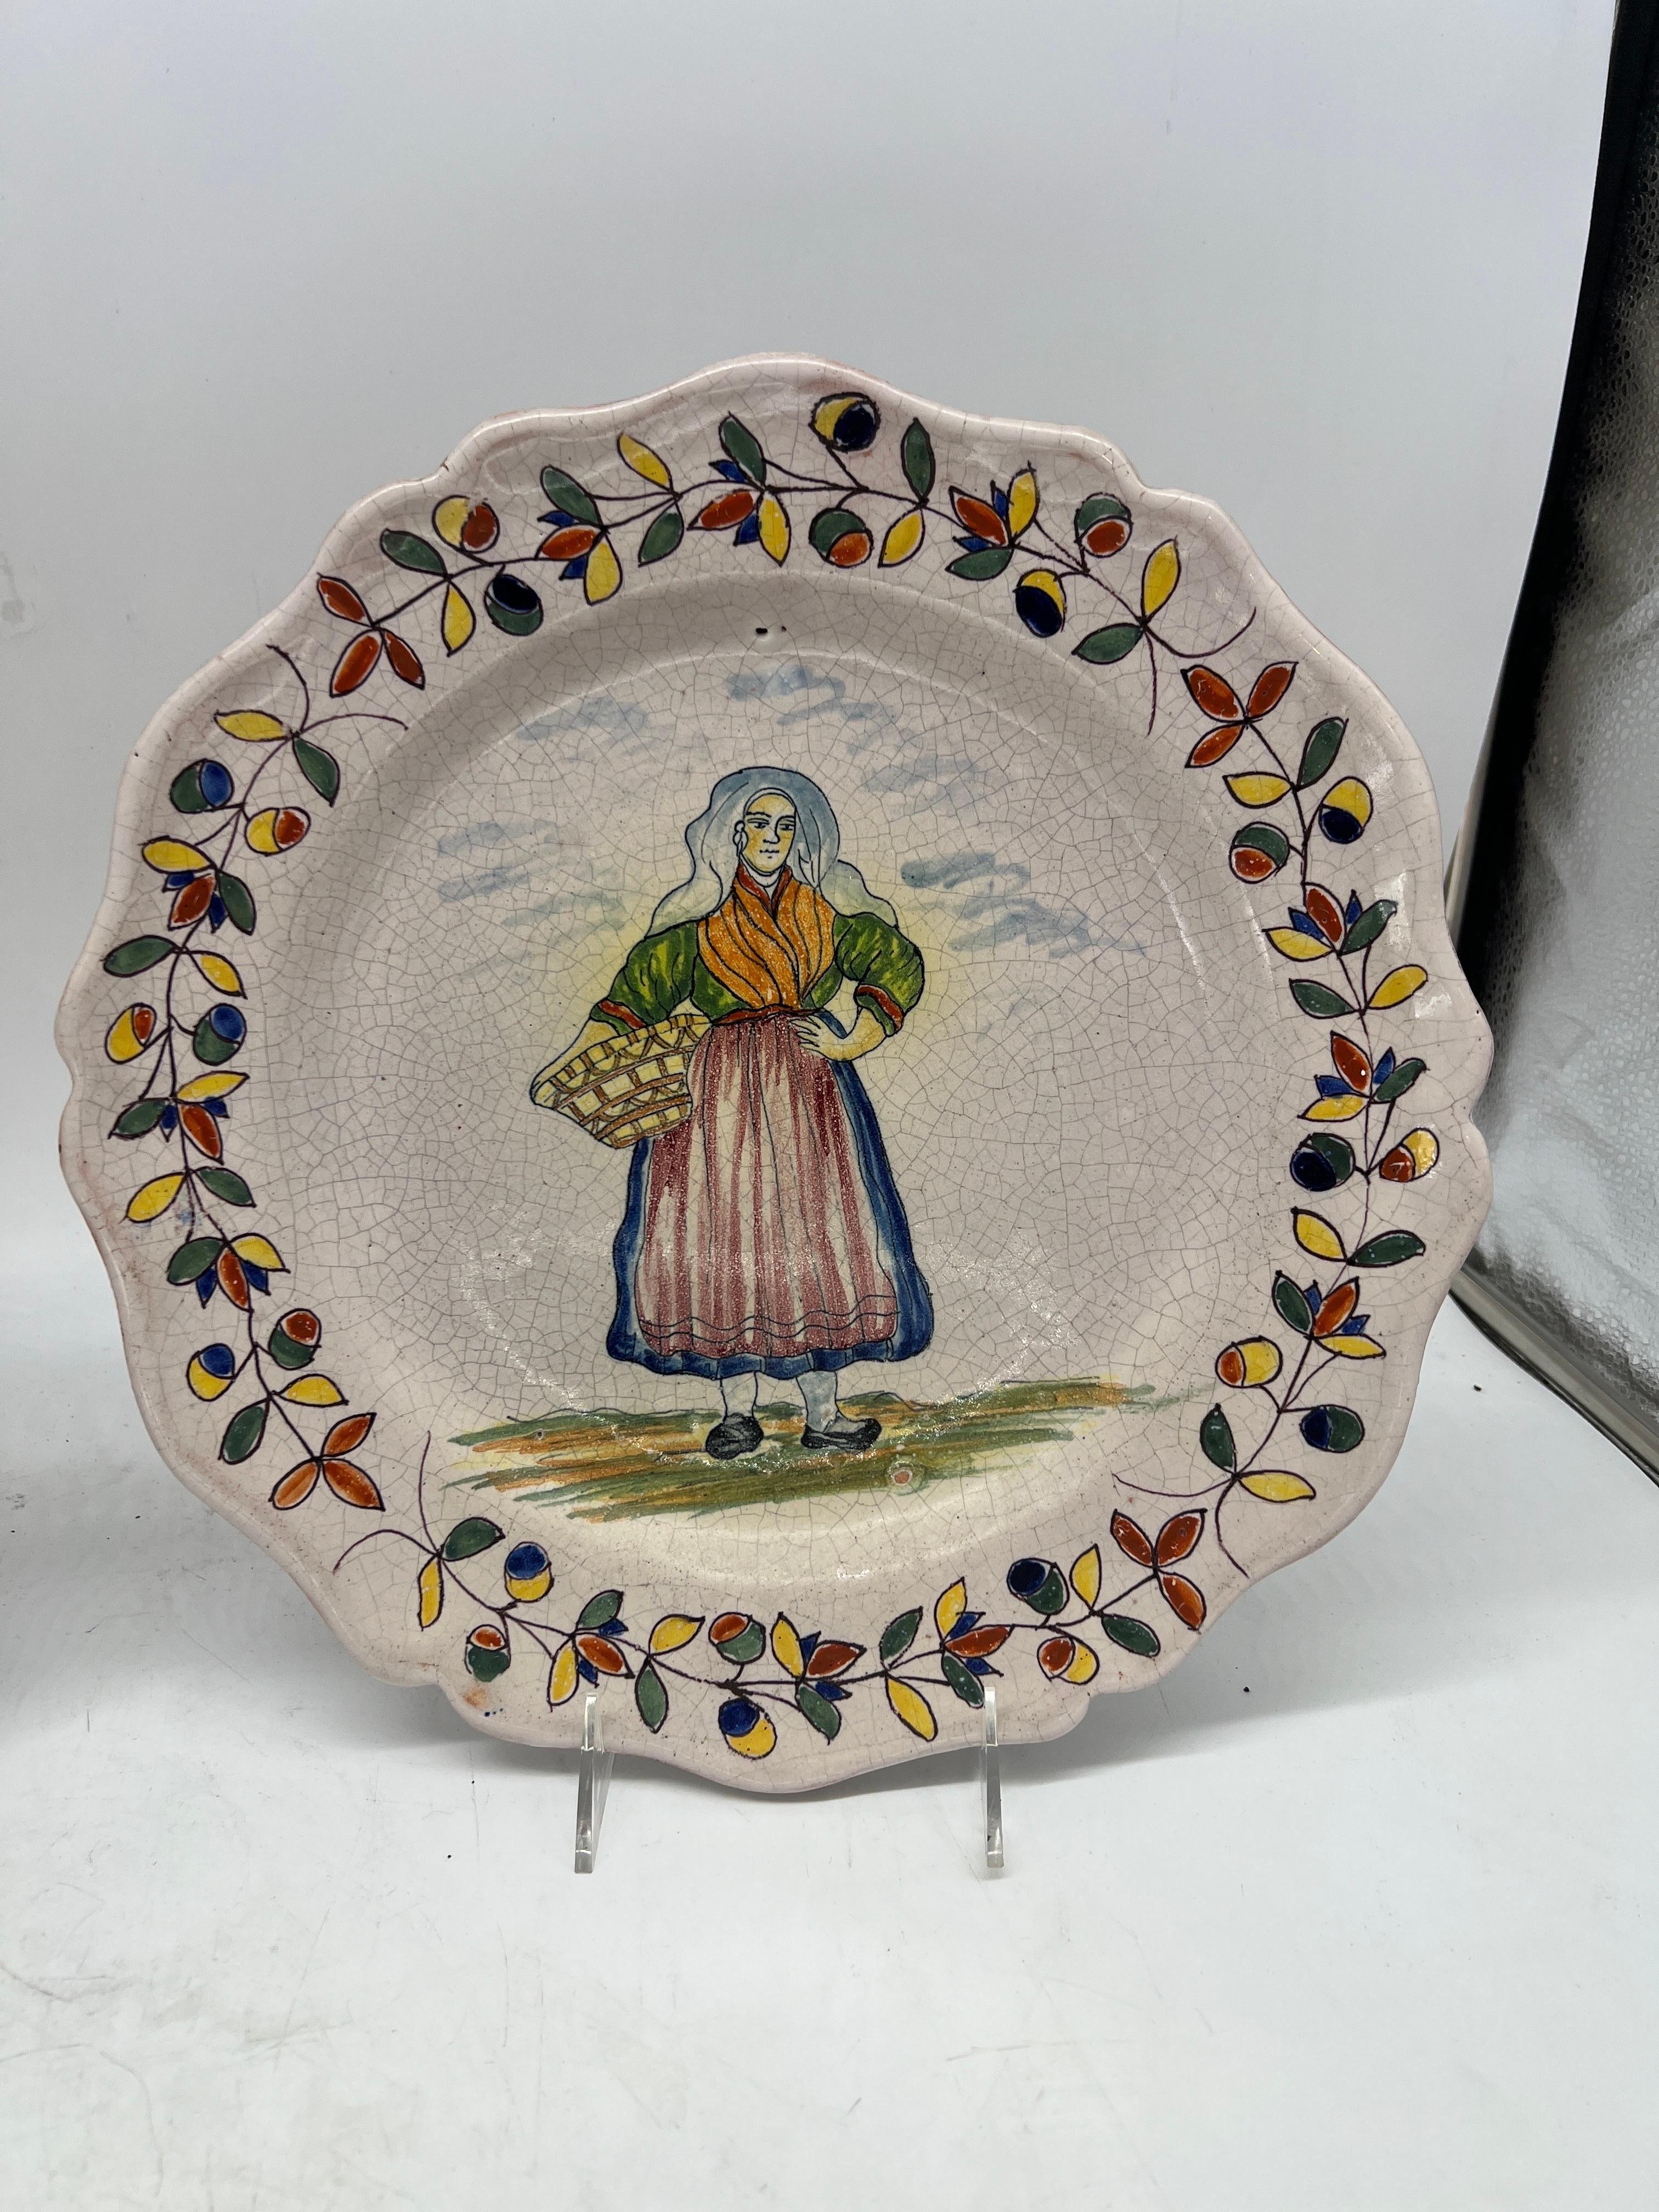 Quimper Pottery, French 20th century.

A pair of vintage Quimper faience pottery plates. Each plate has a hand painted and tin glazed figural surface and accented by a polychrome foliate leaf border. Marked to verso.